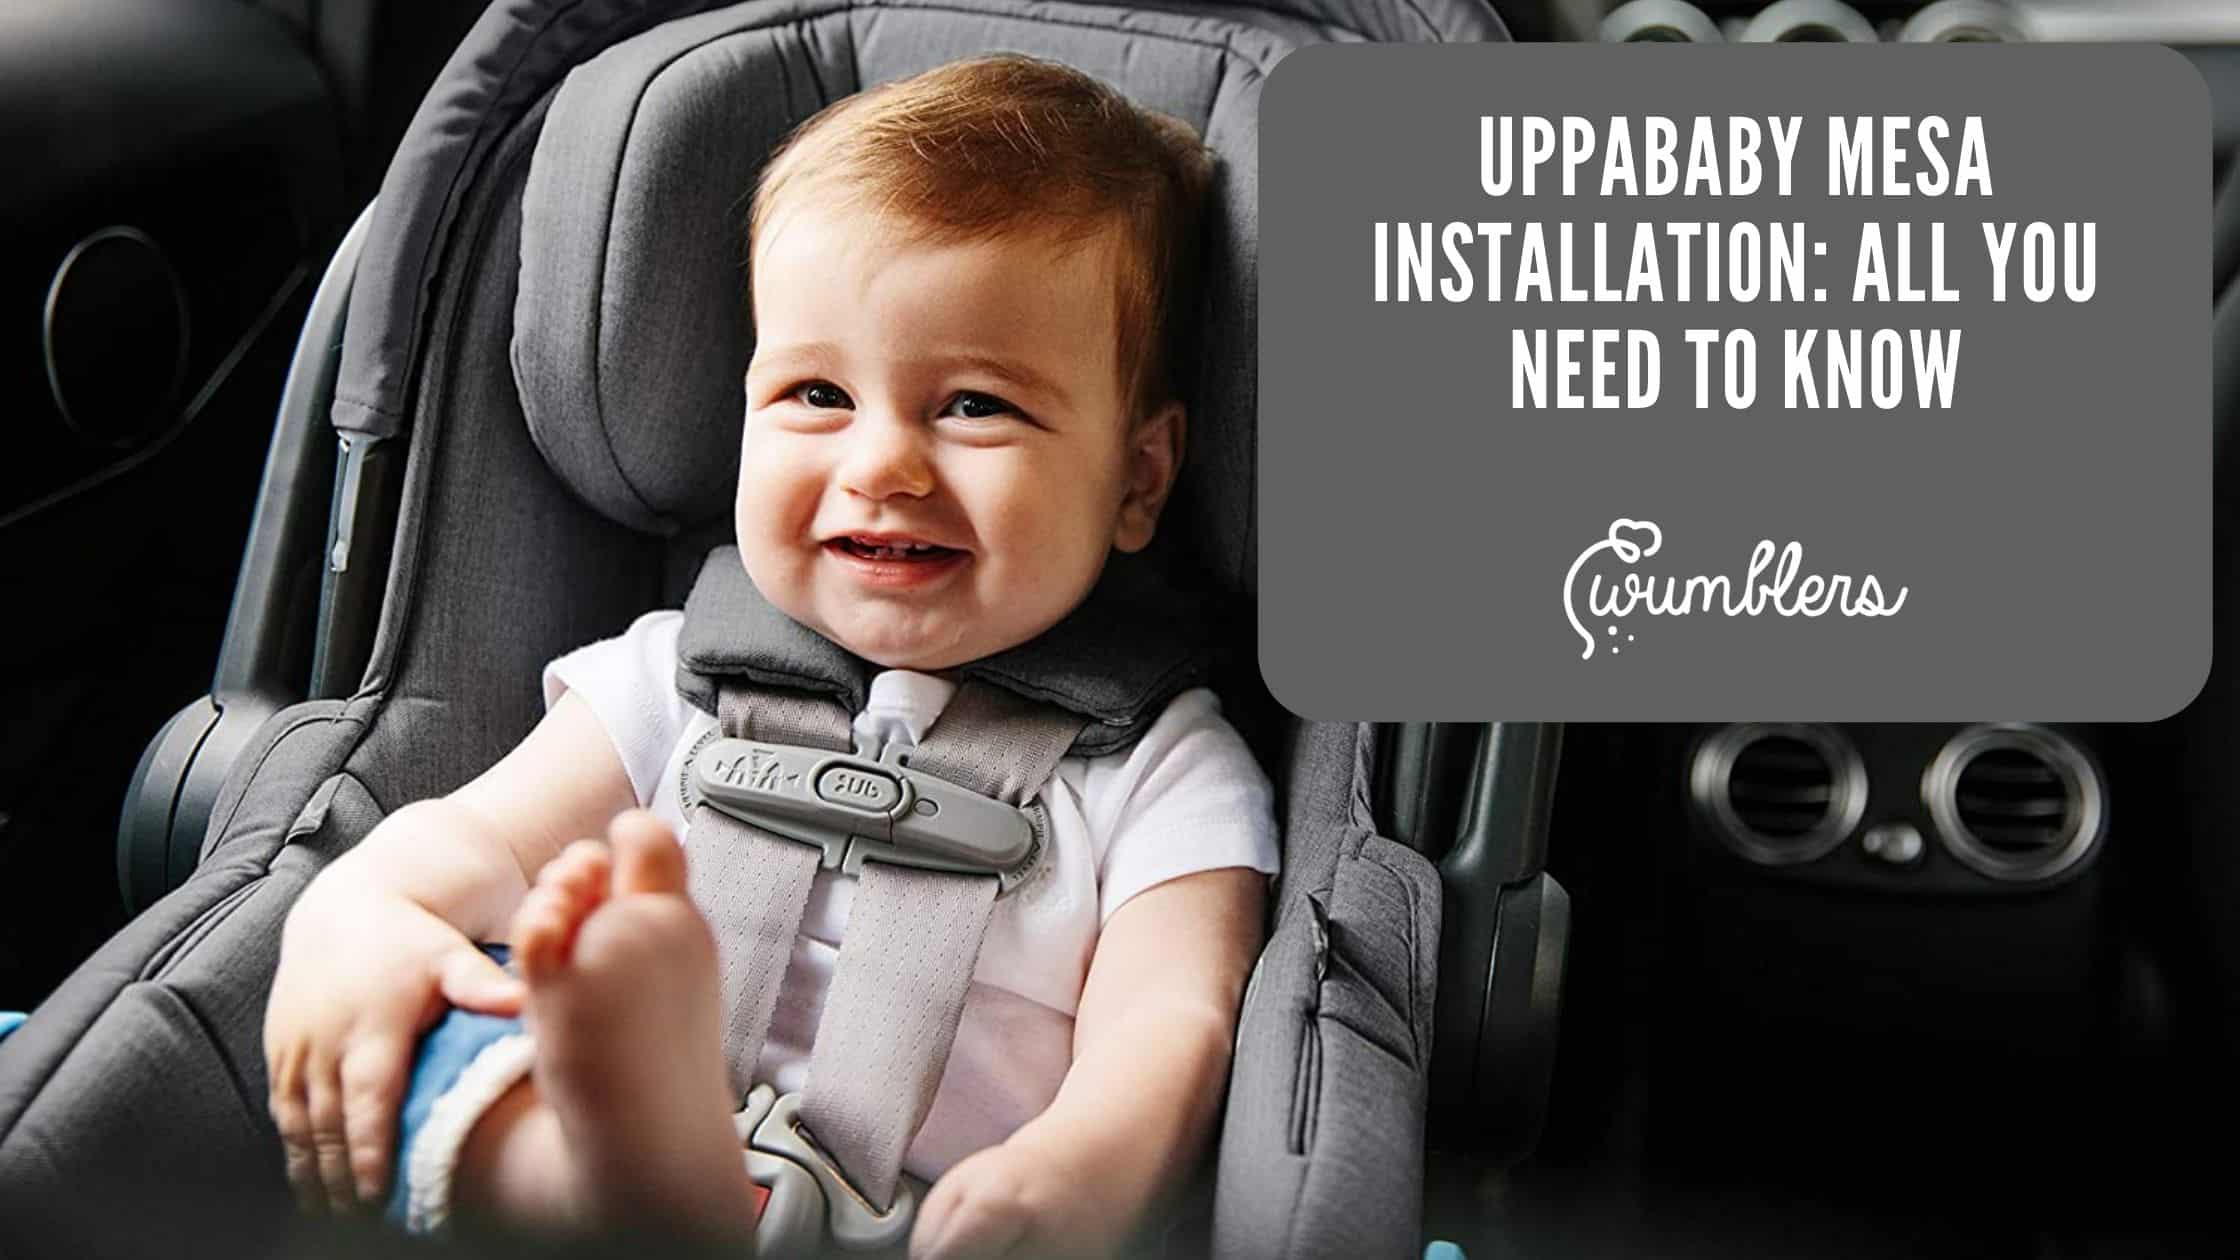 Uppababy Mesa installation All you need to know